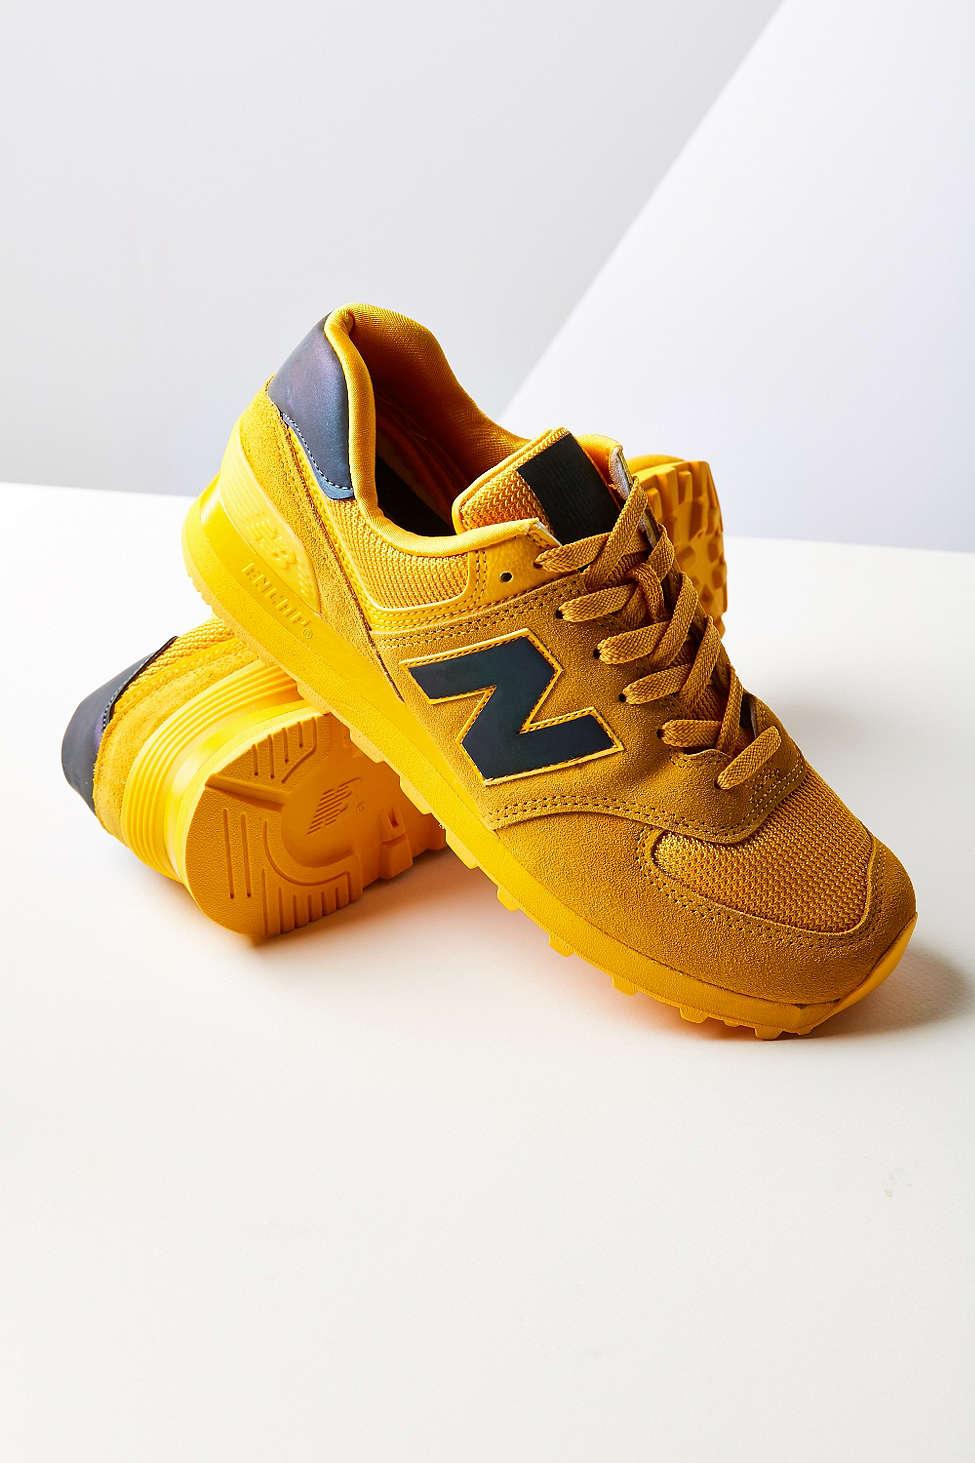 Lyst New Balance 574 Sneakers in Yellow